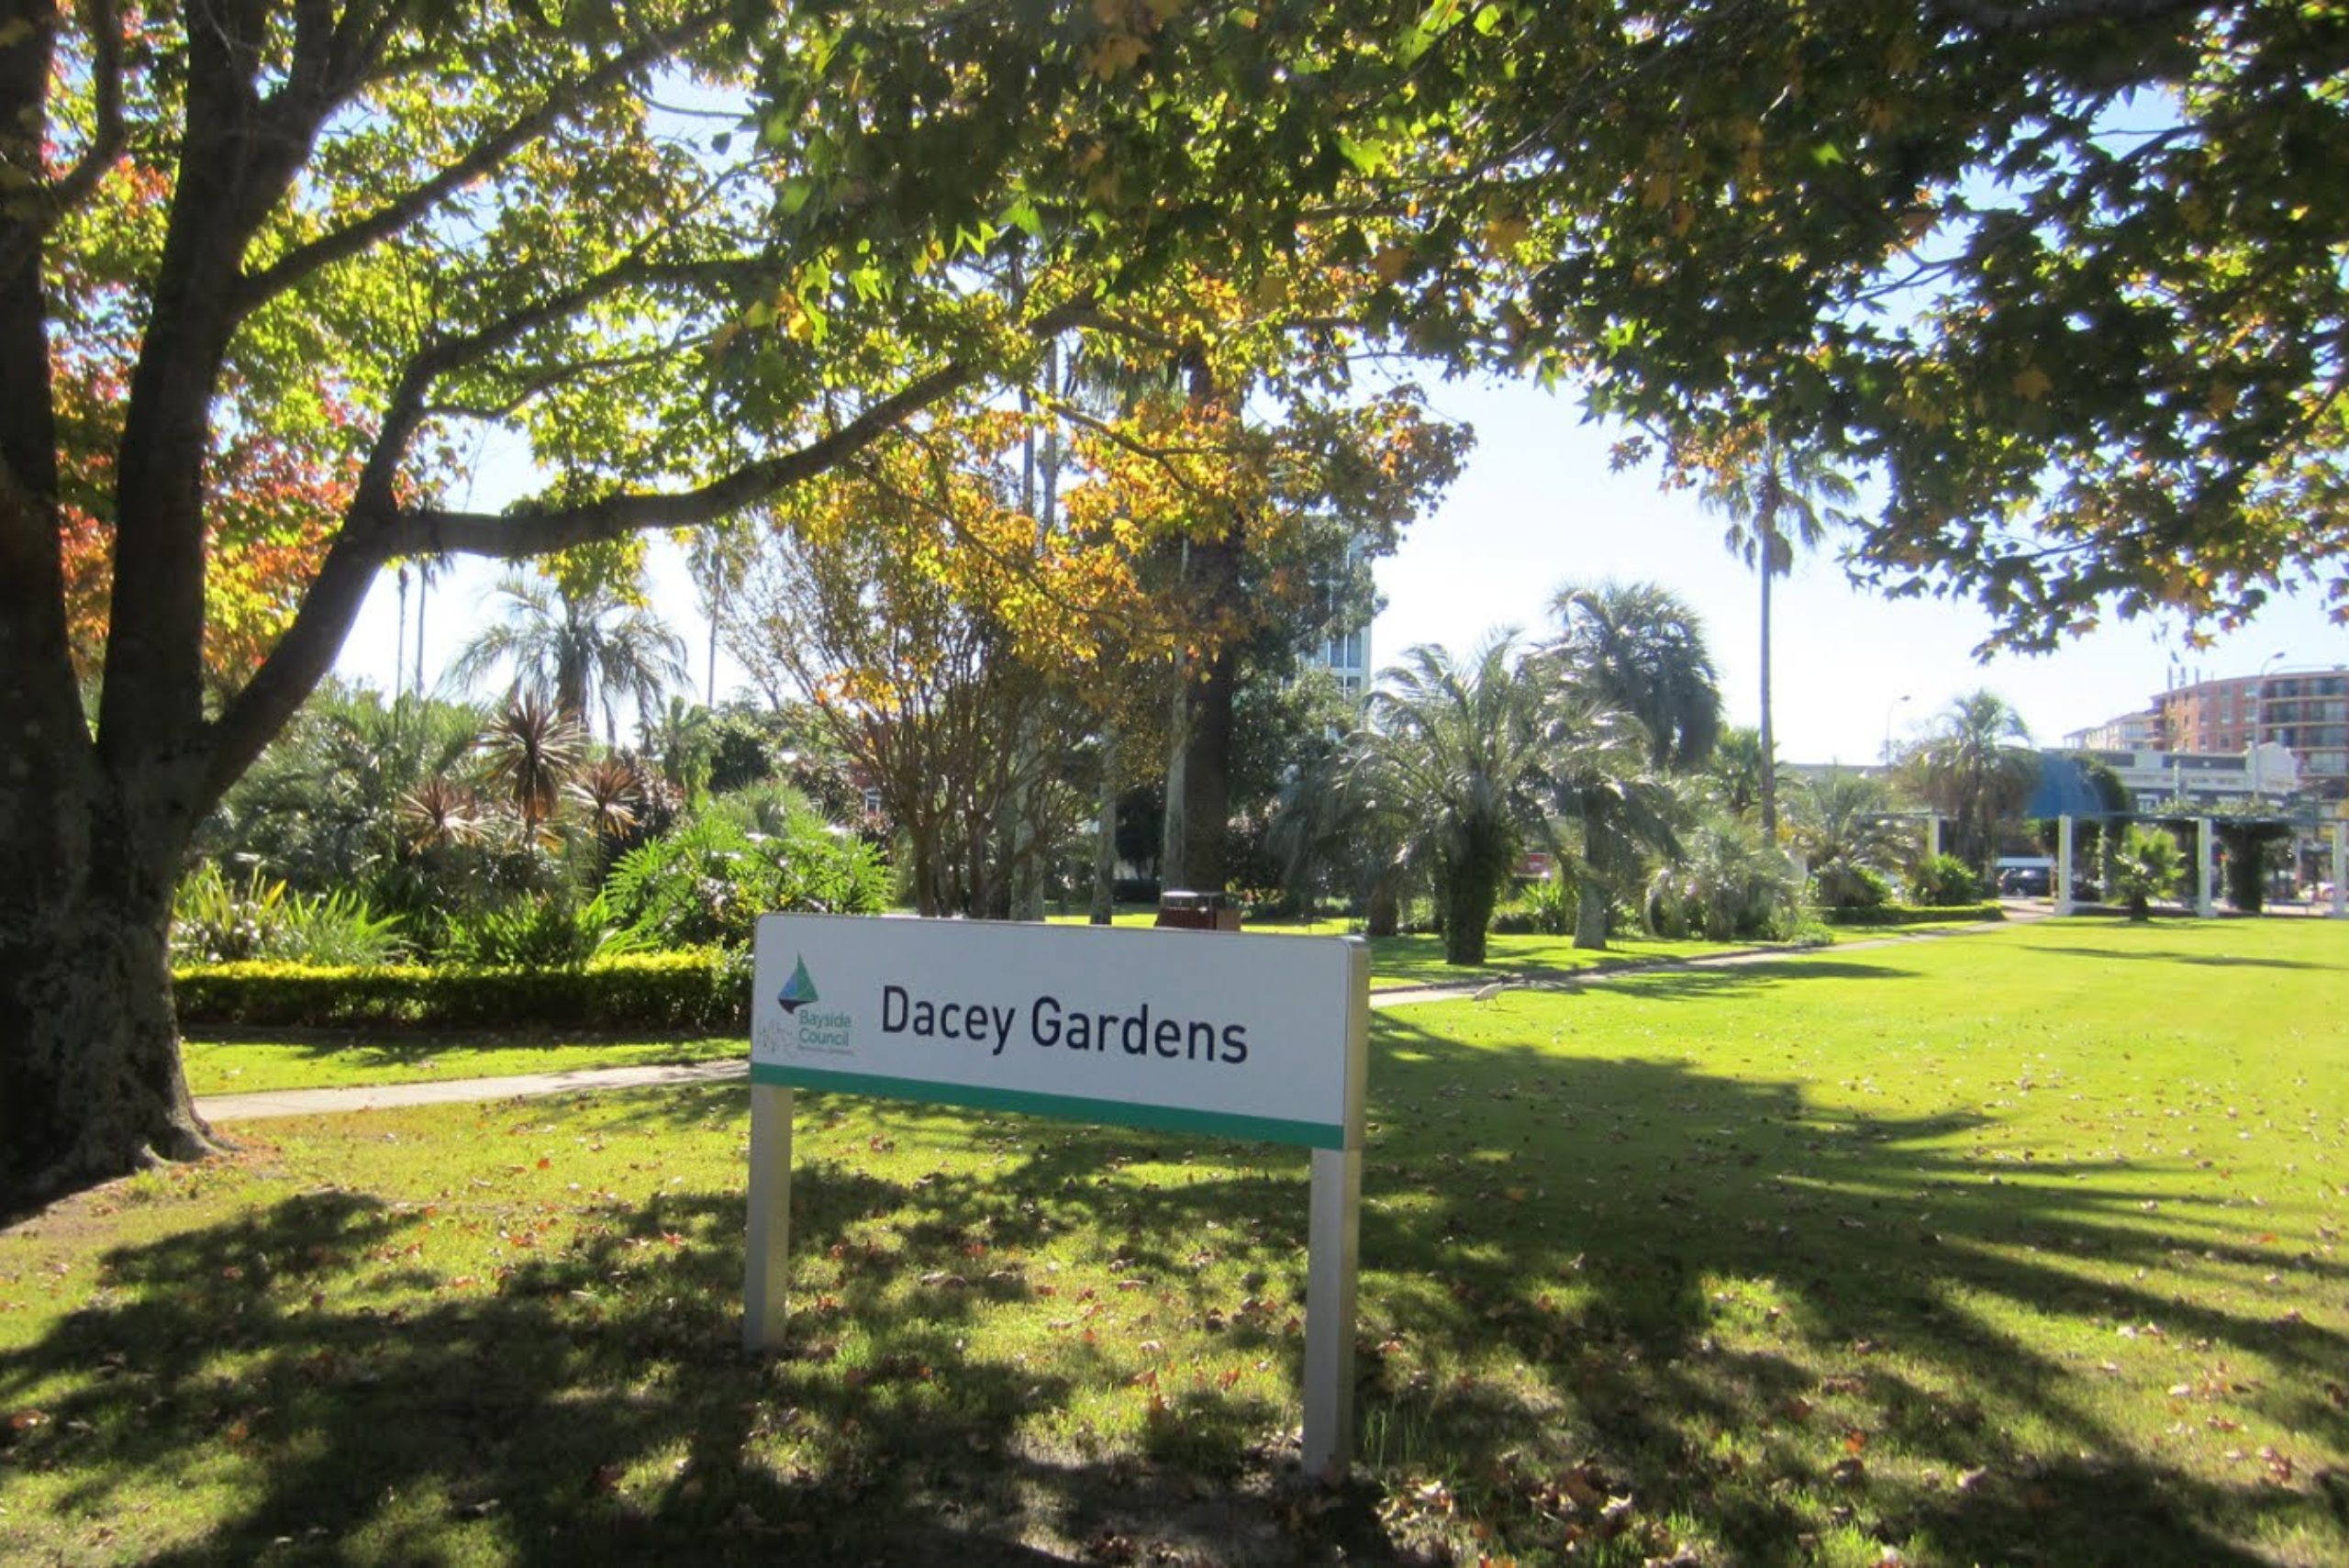 Point Image Dacey Gardens